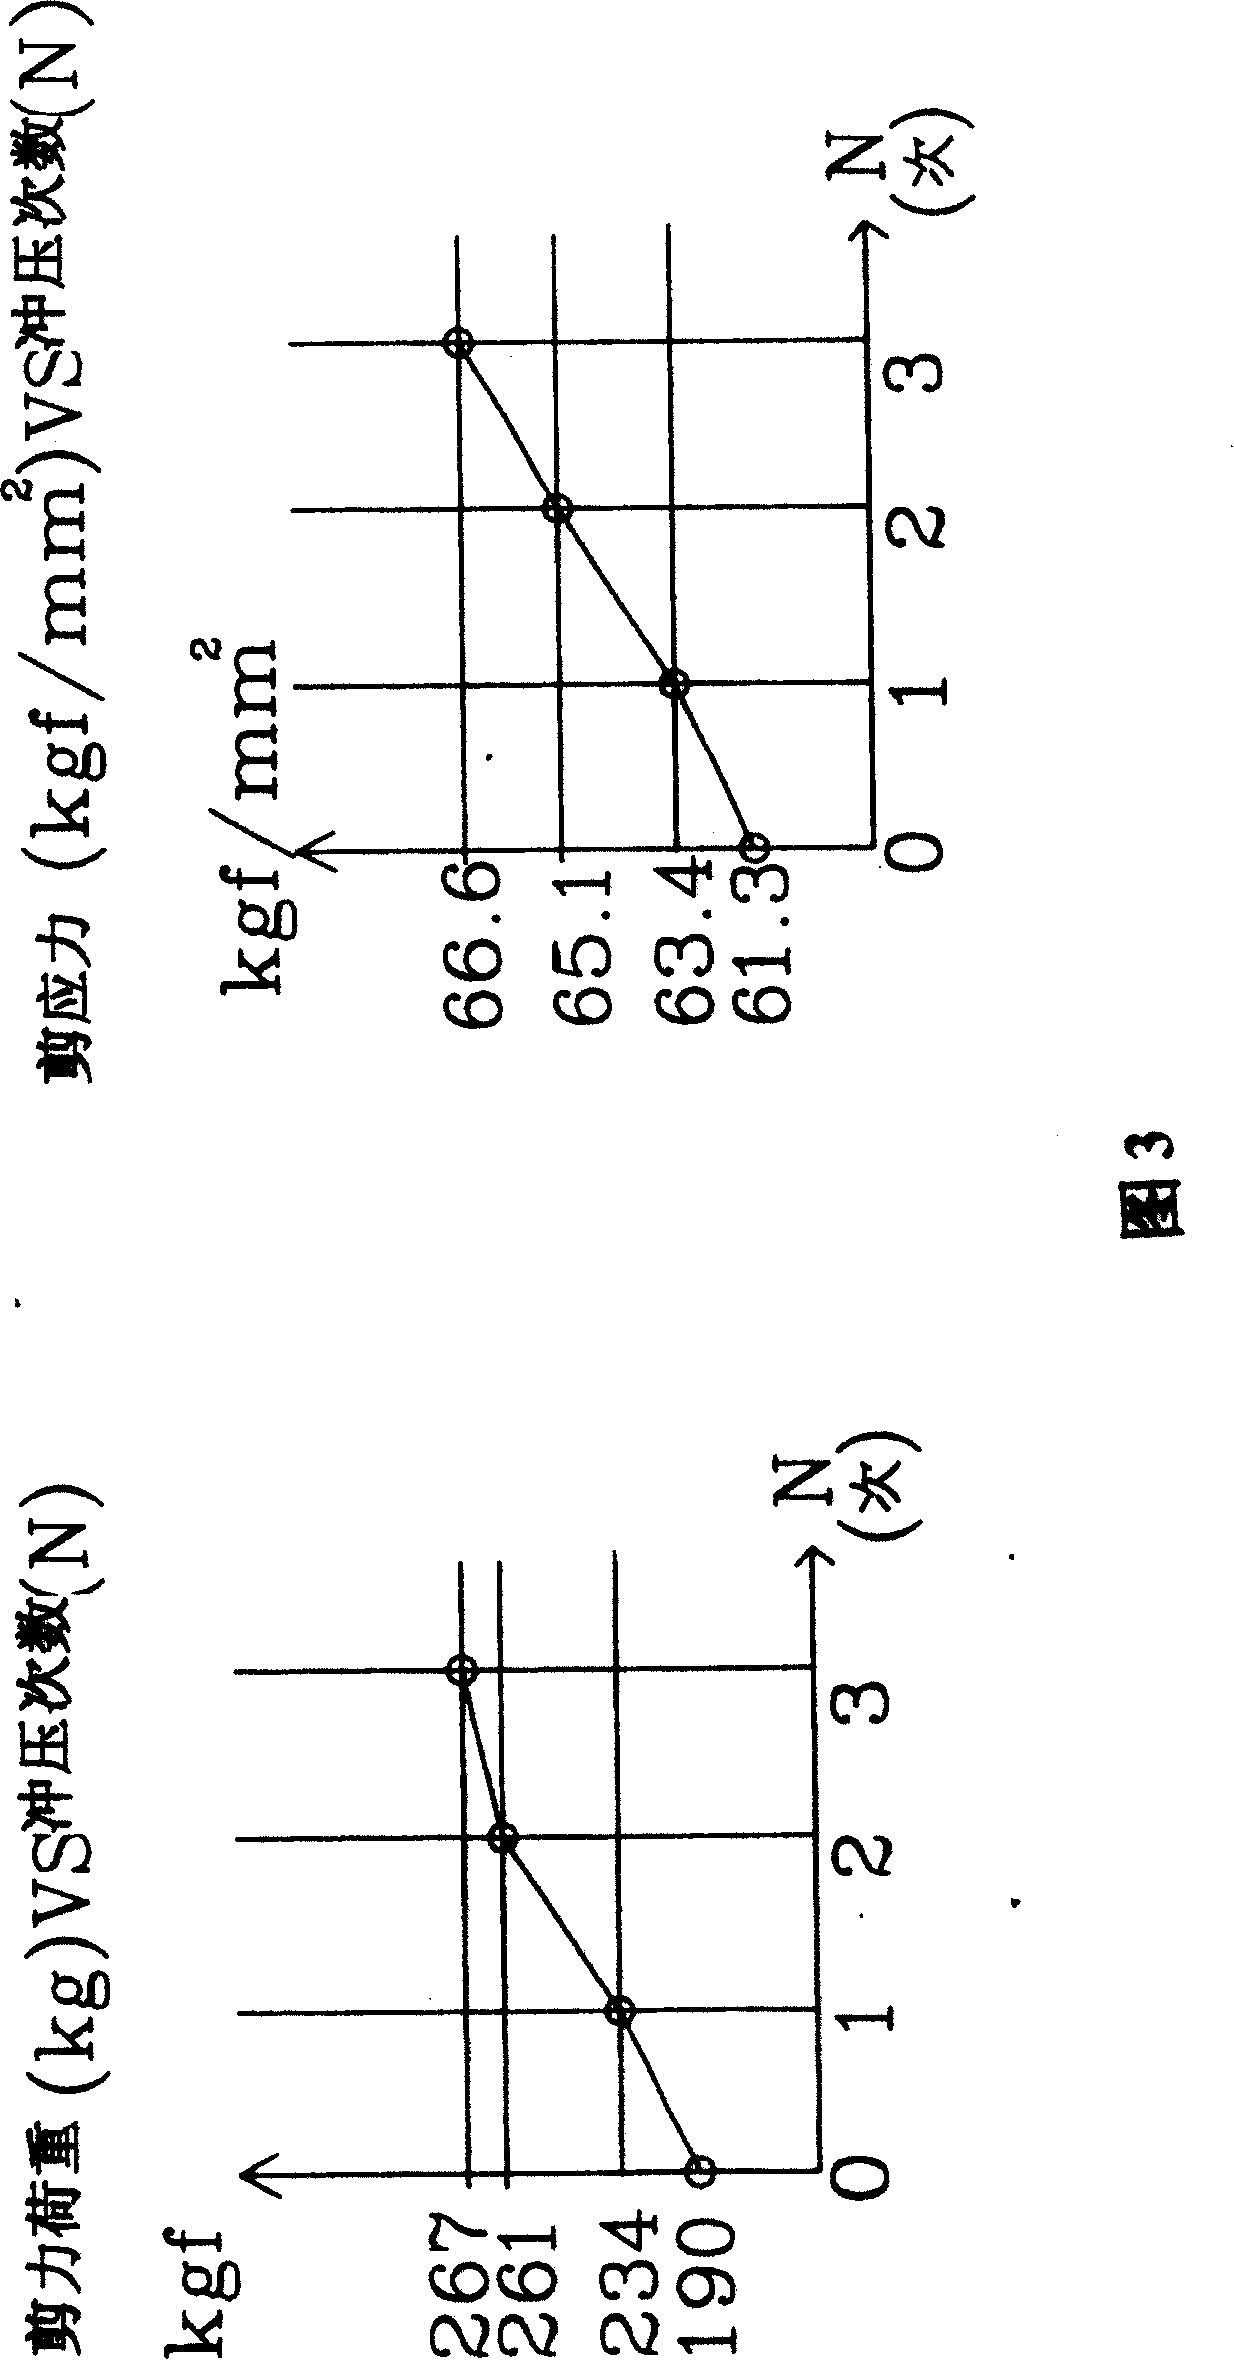 Method for reinforcing spoke structural strength of bicycle and motor vehicle